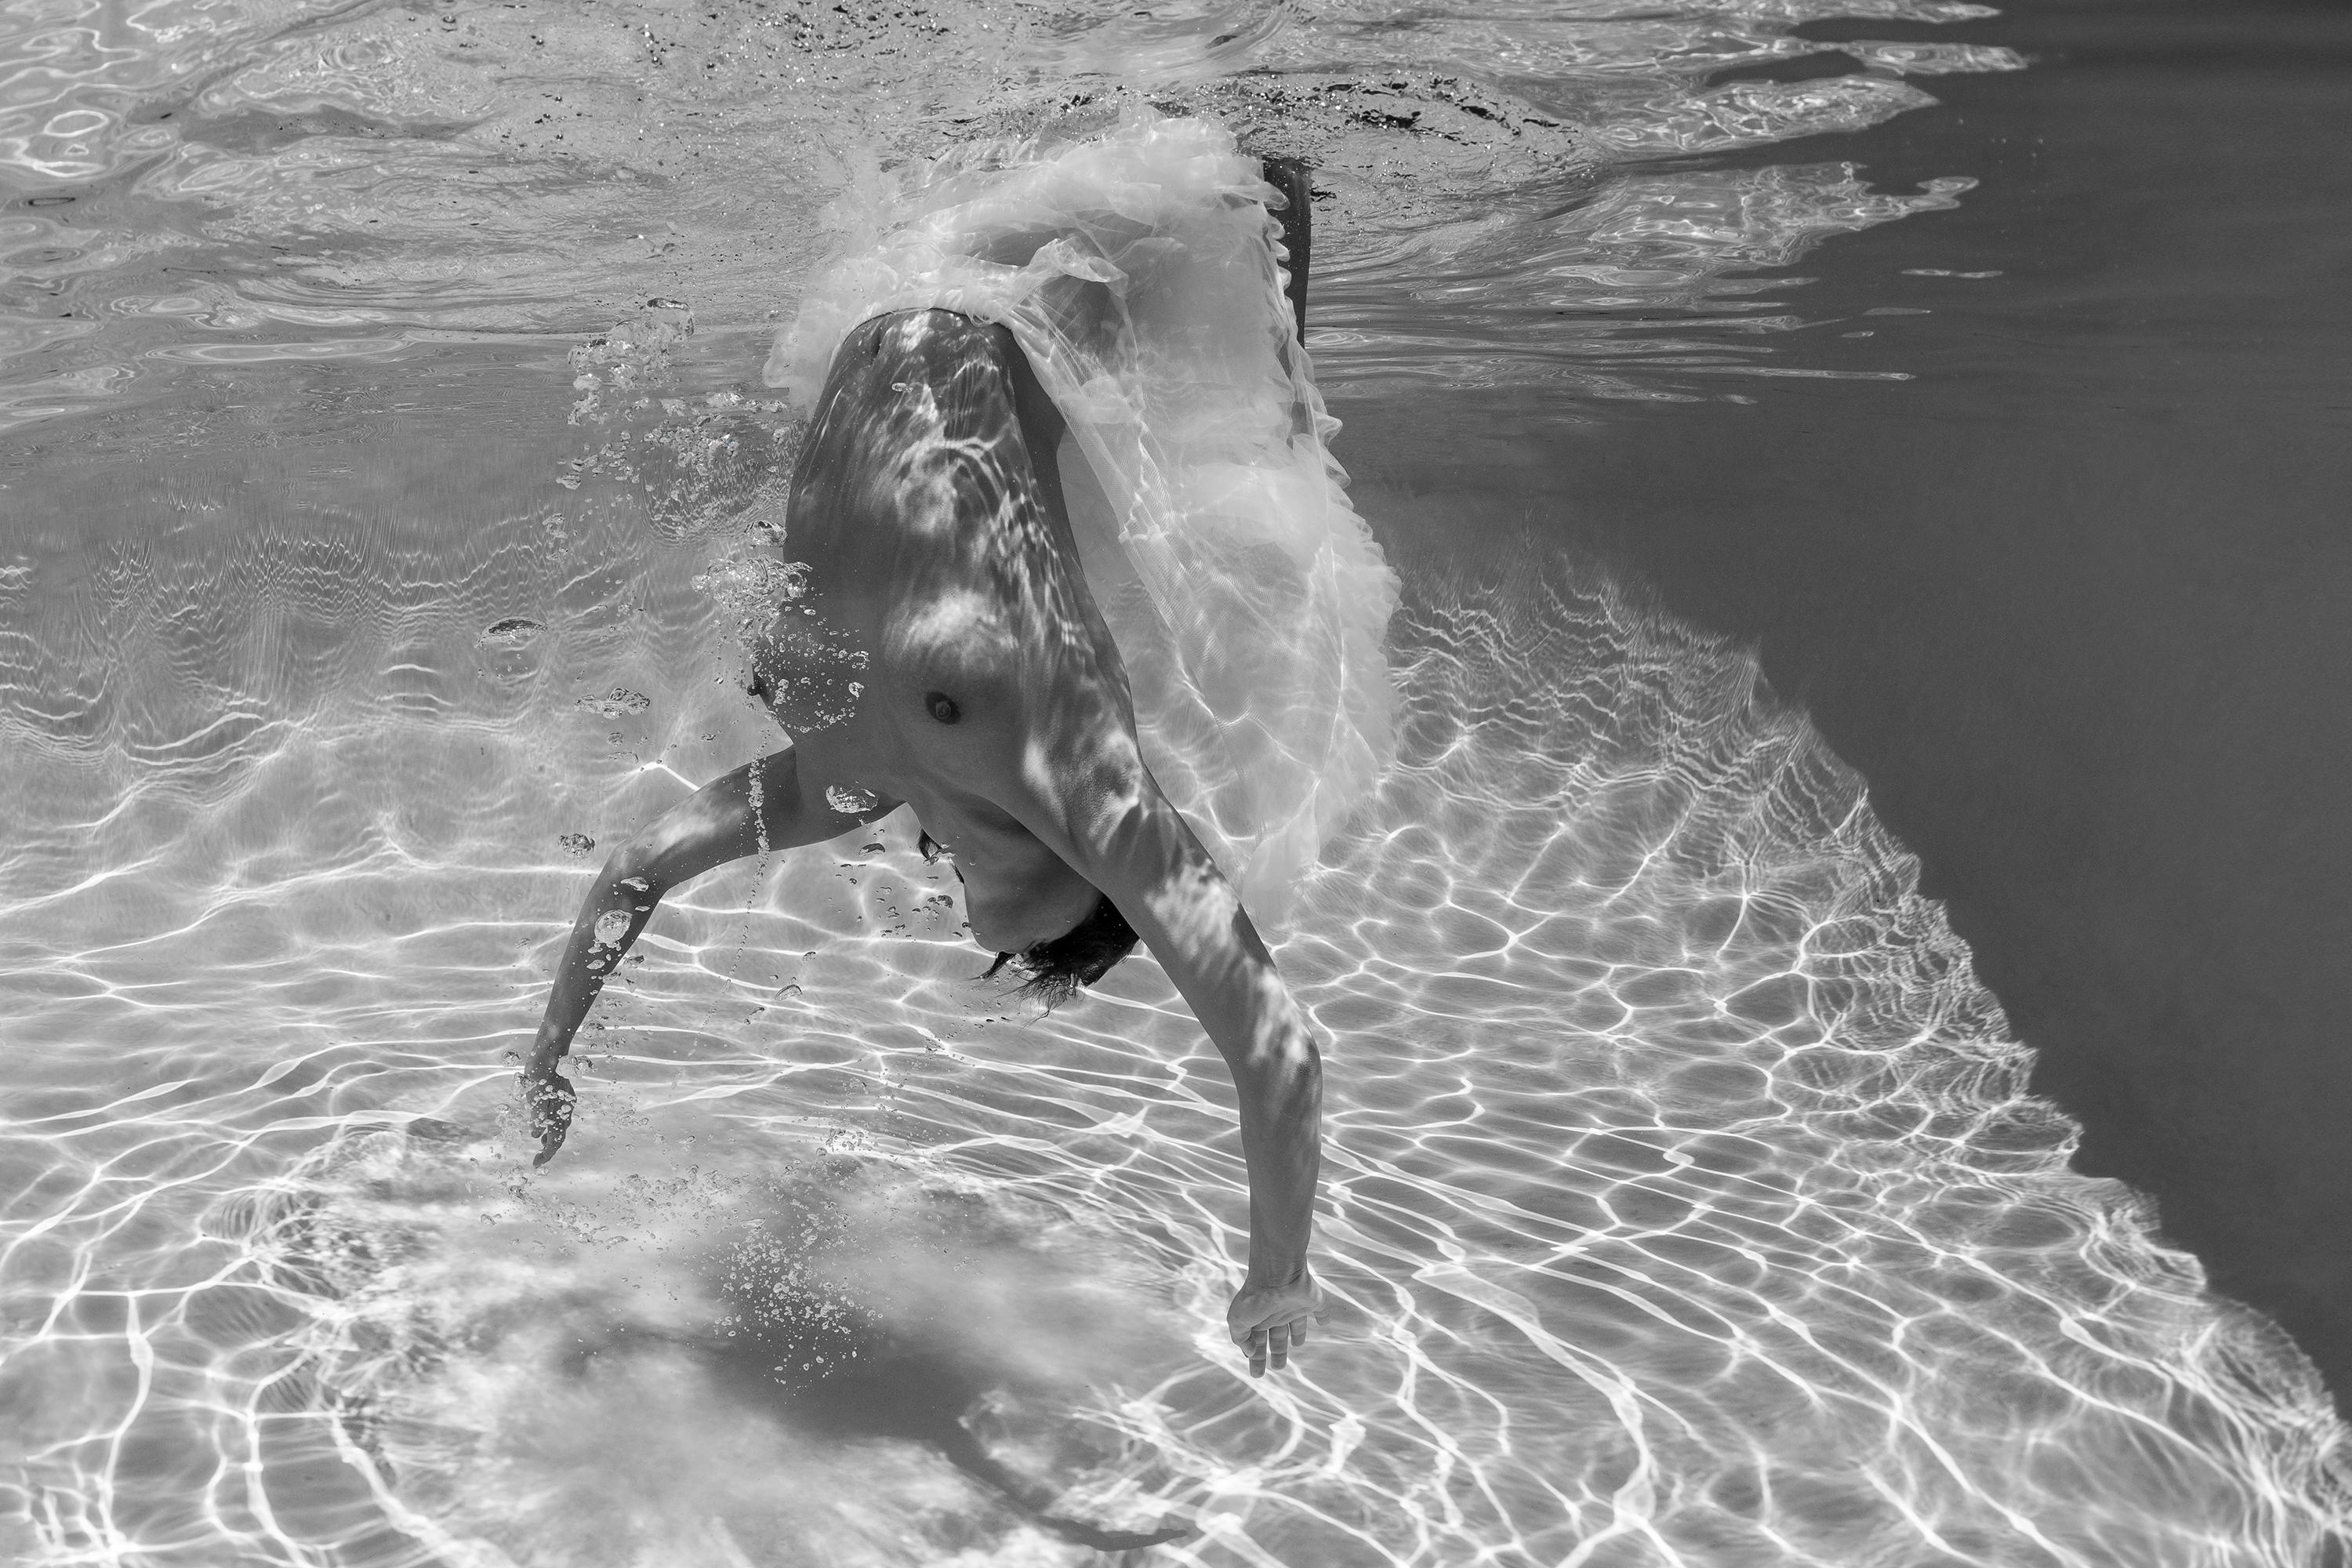 Alex Sher Nude Photograph - Shapes and Shadows - underwater nude b&w photograph - archival pigment 35x54"